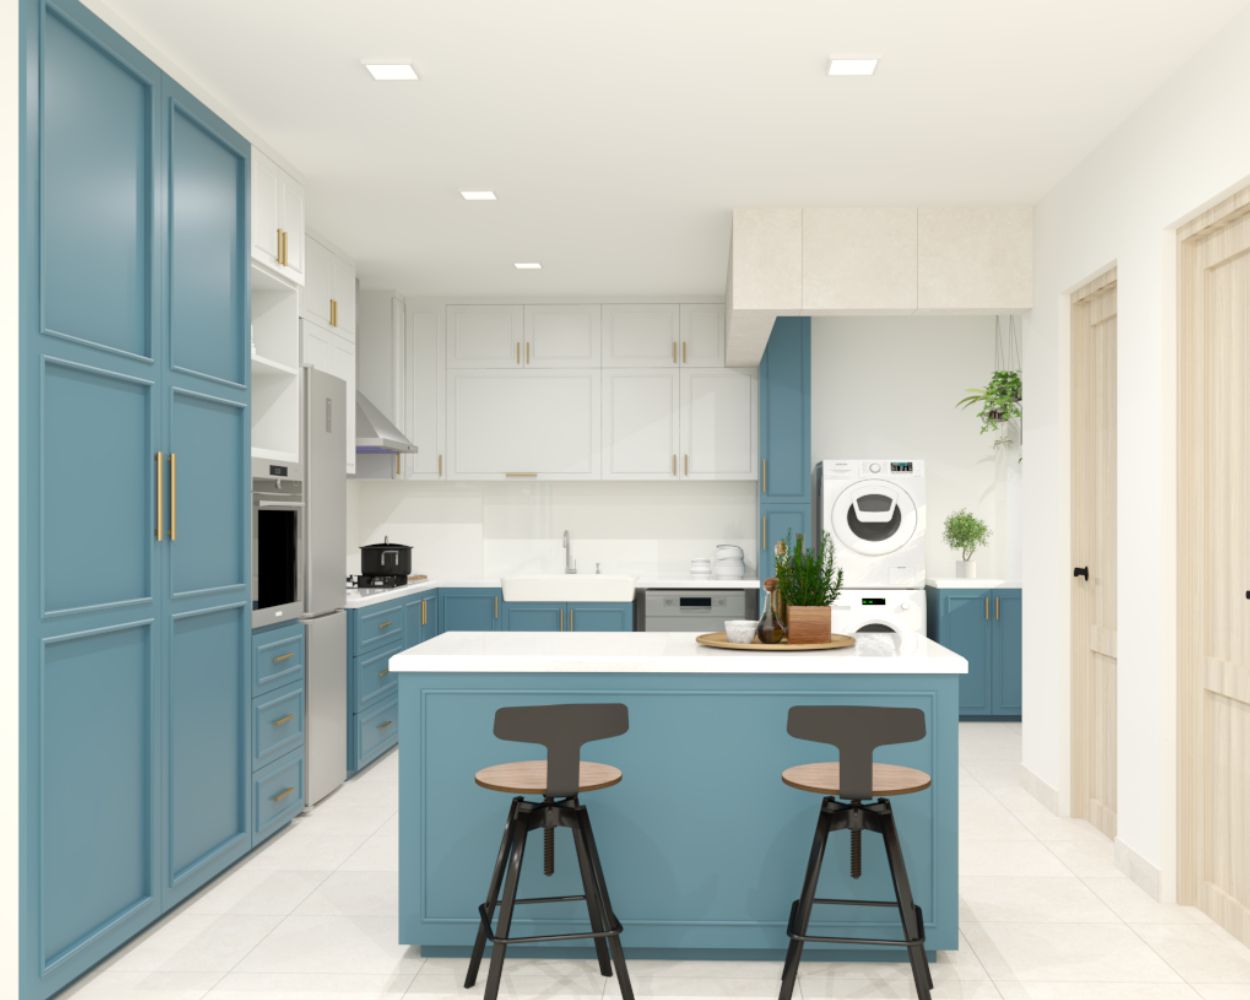 Contemporary Interior Design For Kitchens With A Breakfast Counter